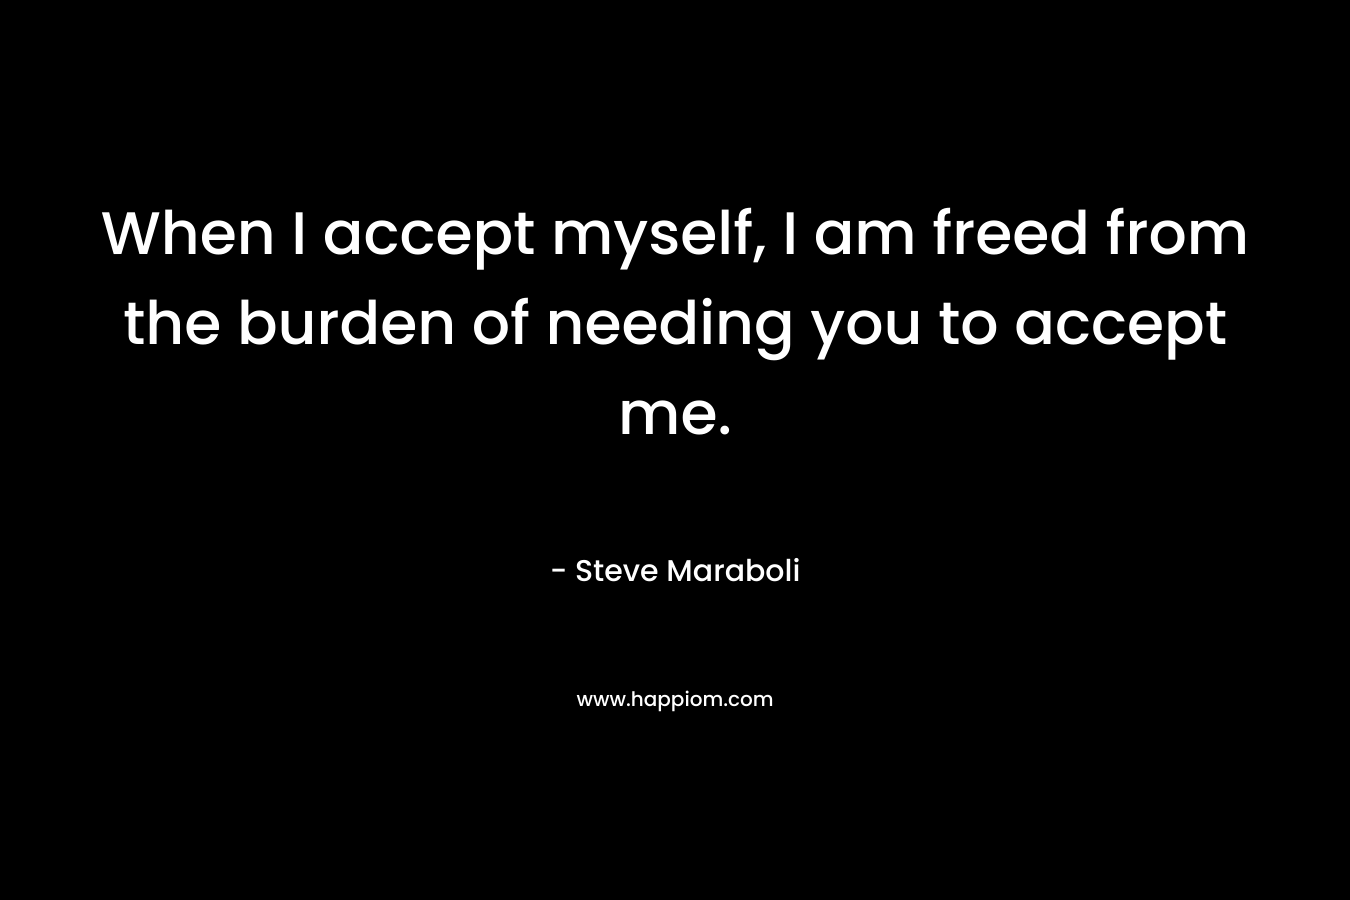 When I accept myself, I am freed from the burden of needing you to accept me. – Steve Maraboli